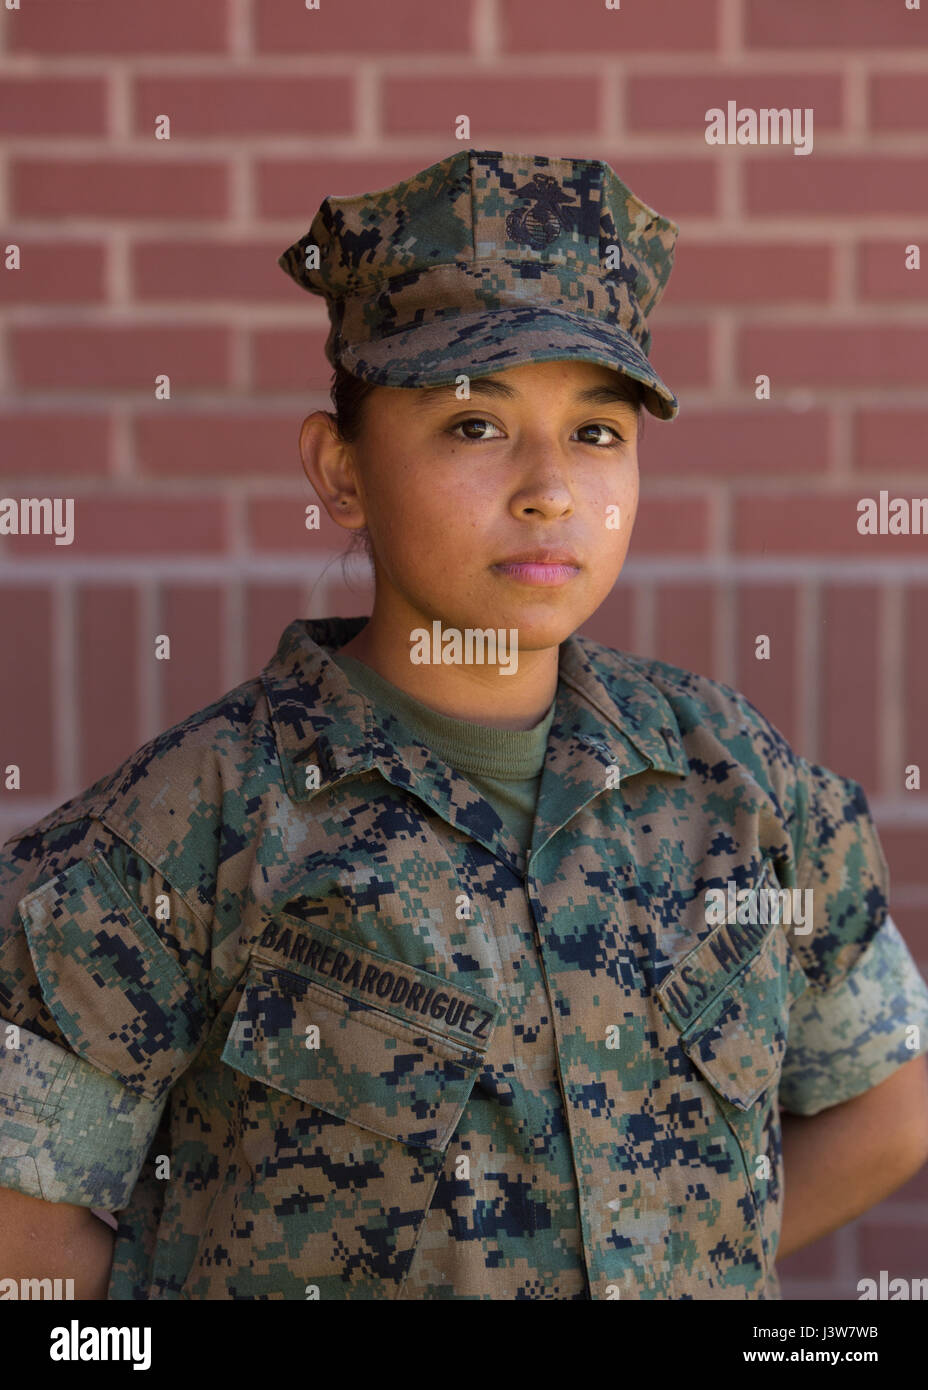 Pvt. Ada E. Barrera Rodriguez, Platoon 4017, Oscar Company, 4th Recruit Training Battalion, earned U.S. citizenship May 4, 2017, on Parris Island, S.C. Before earning citizenship, applicants must demonstrate knowledge of the English language and American government, show good moral character and take the Oath of Allegiance to the U.S. Constitution. Barrera Rodriguez, from Chicago, originally from Mexico, is scheduled to graduate May 5, 2017. (Photos by Lance Cpl. Maximiliano Bavastro) Stock Photo